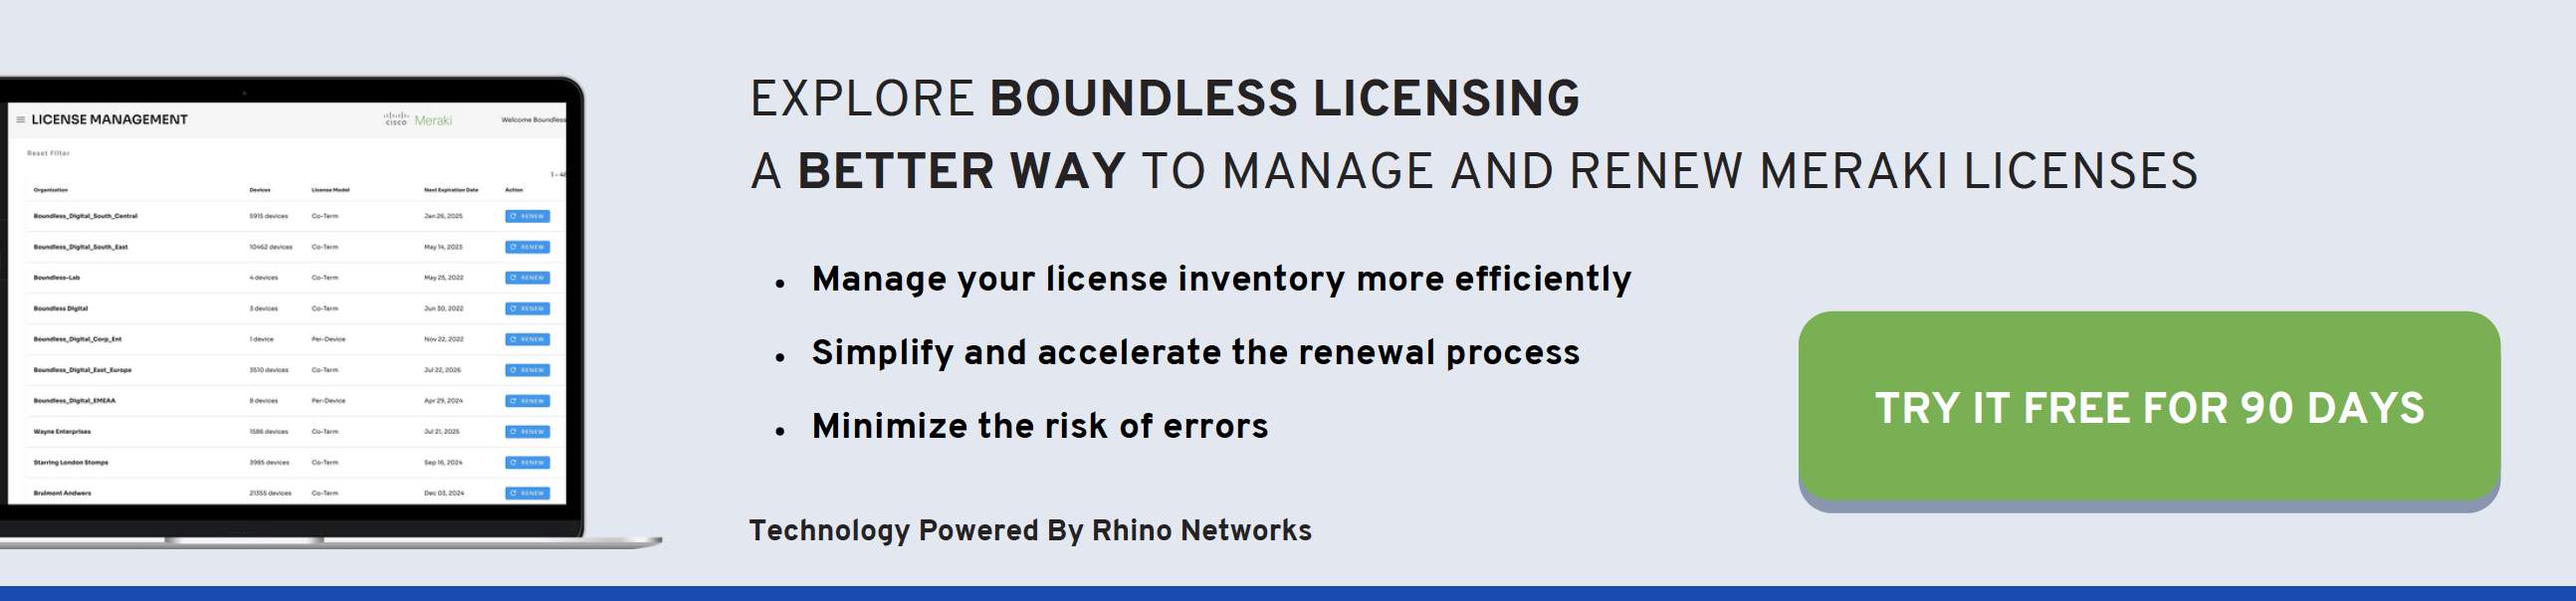 Boundless Licensing